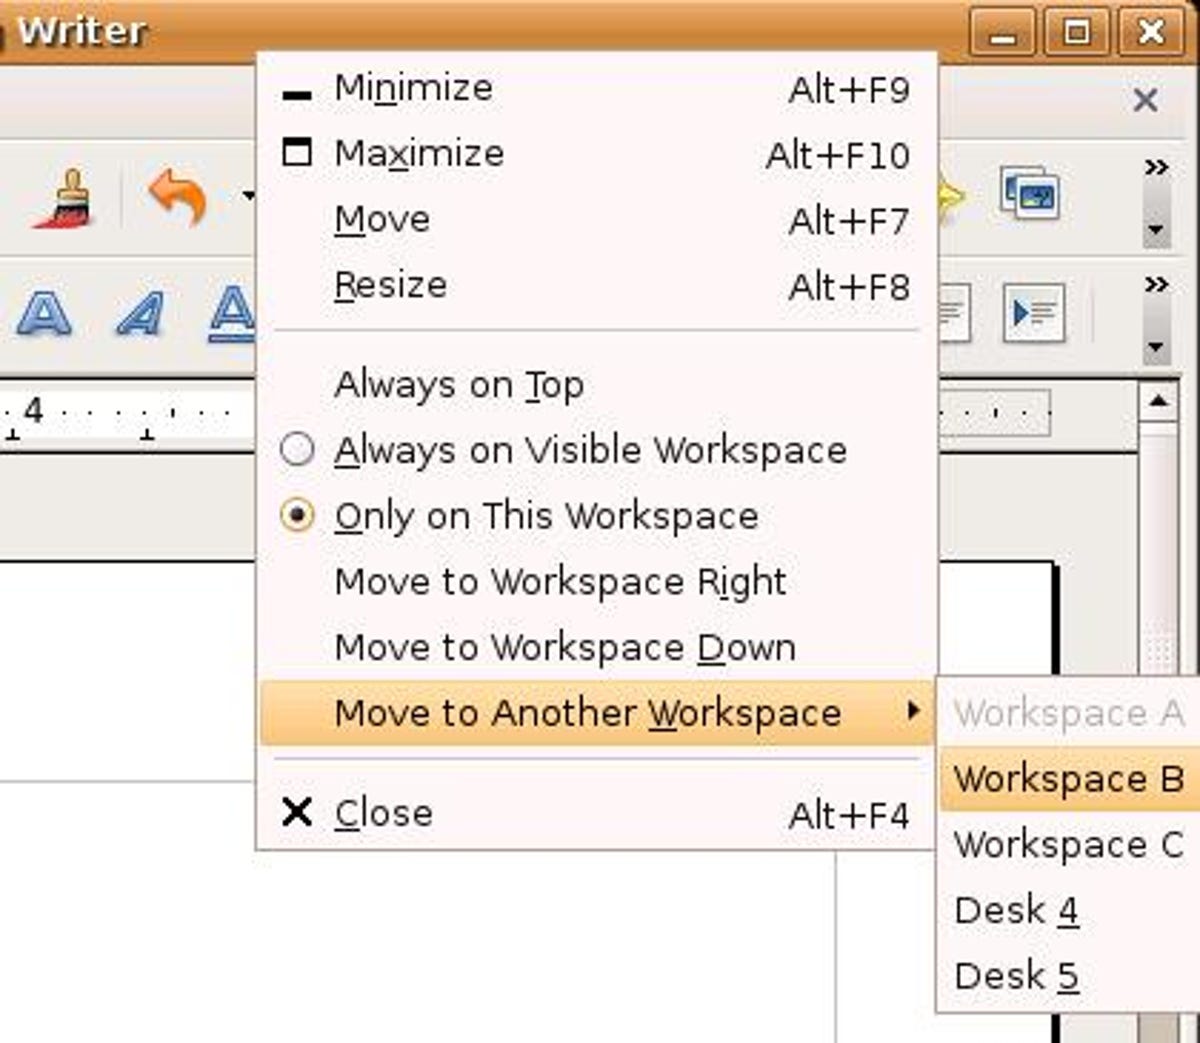 Options for moving between workspaces on the right-click menu of the Linux Gnome interface